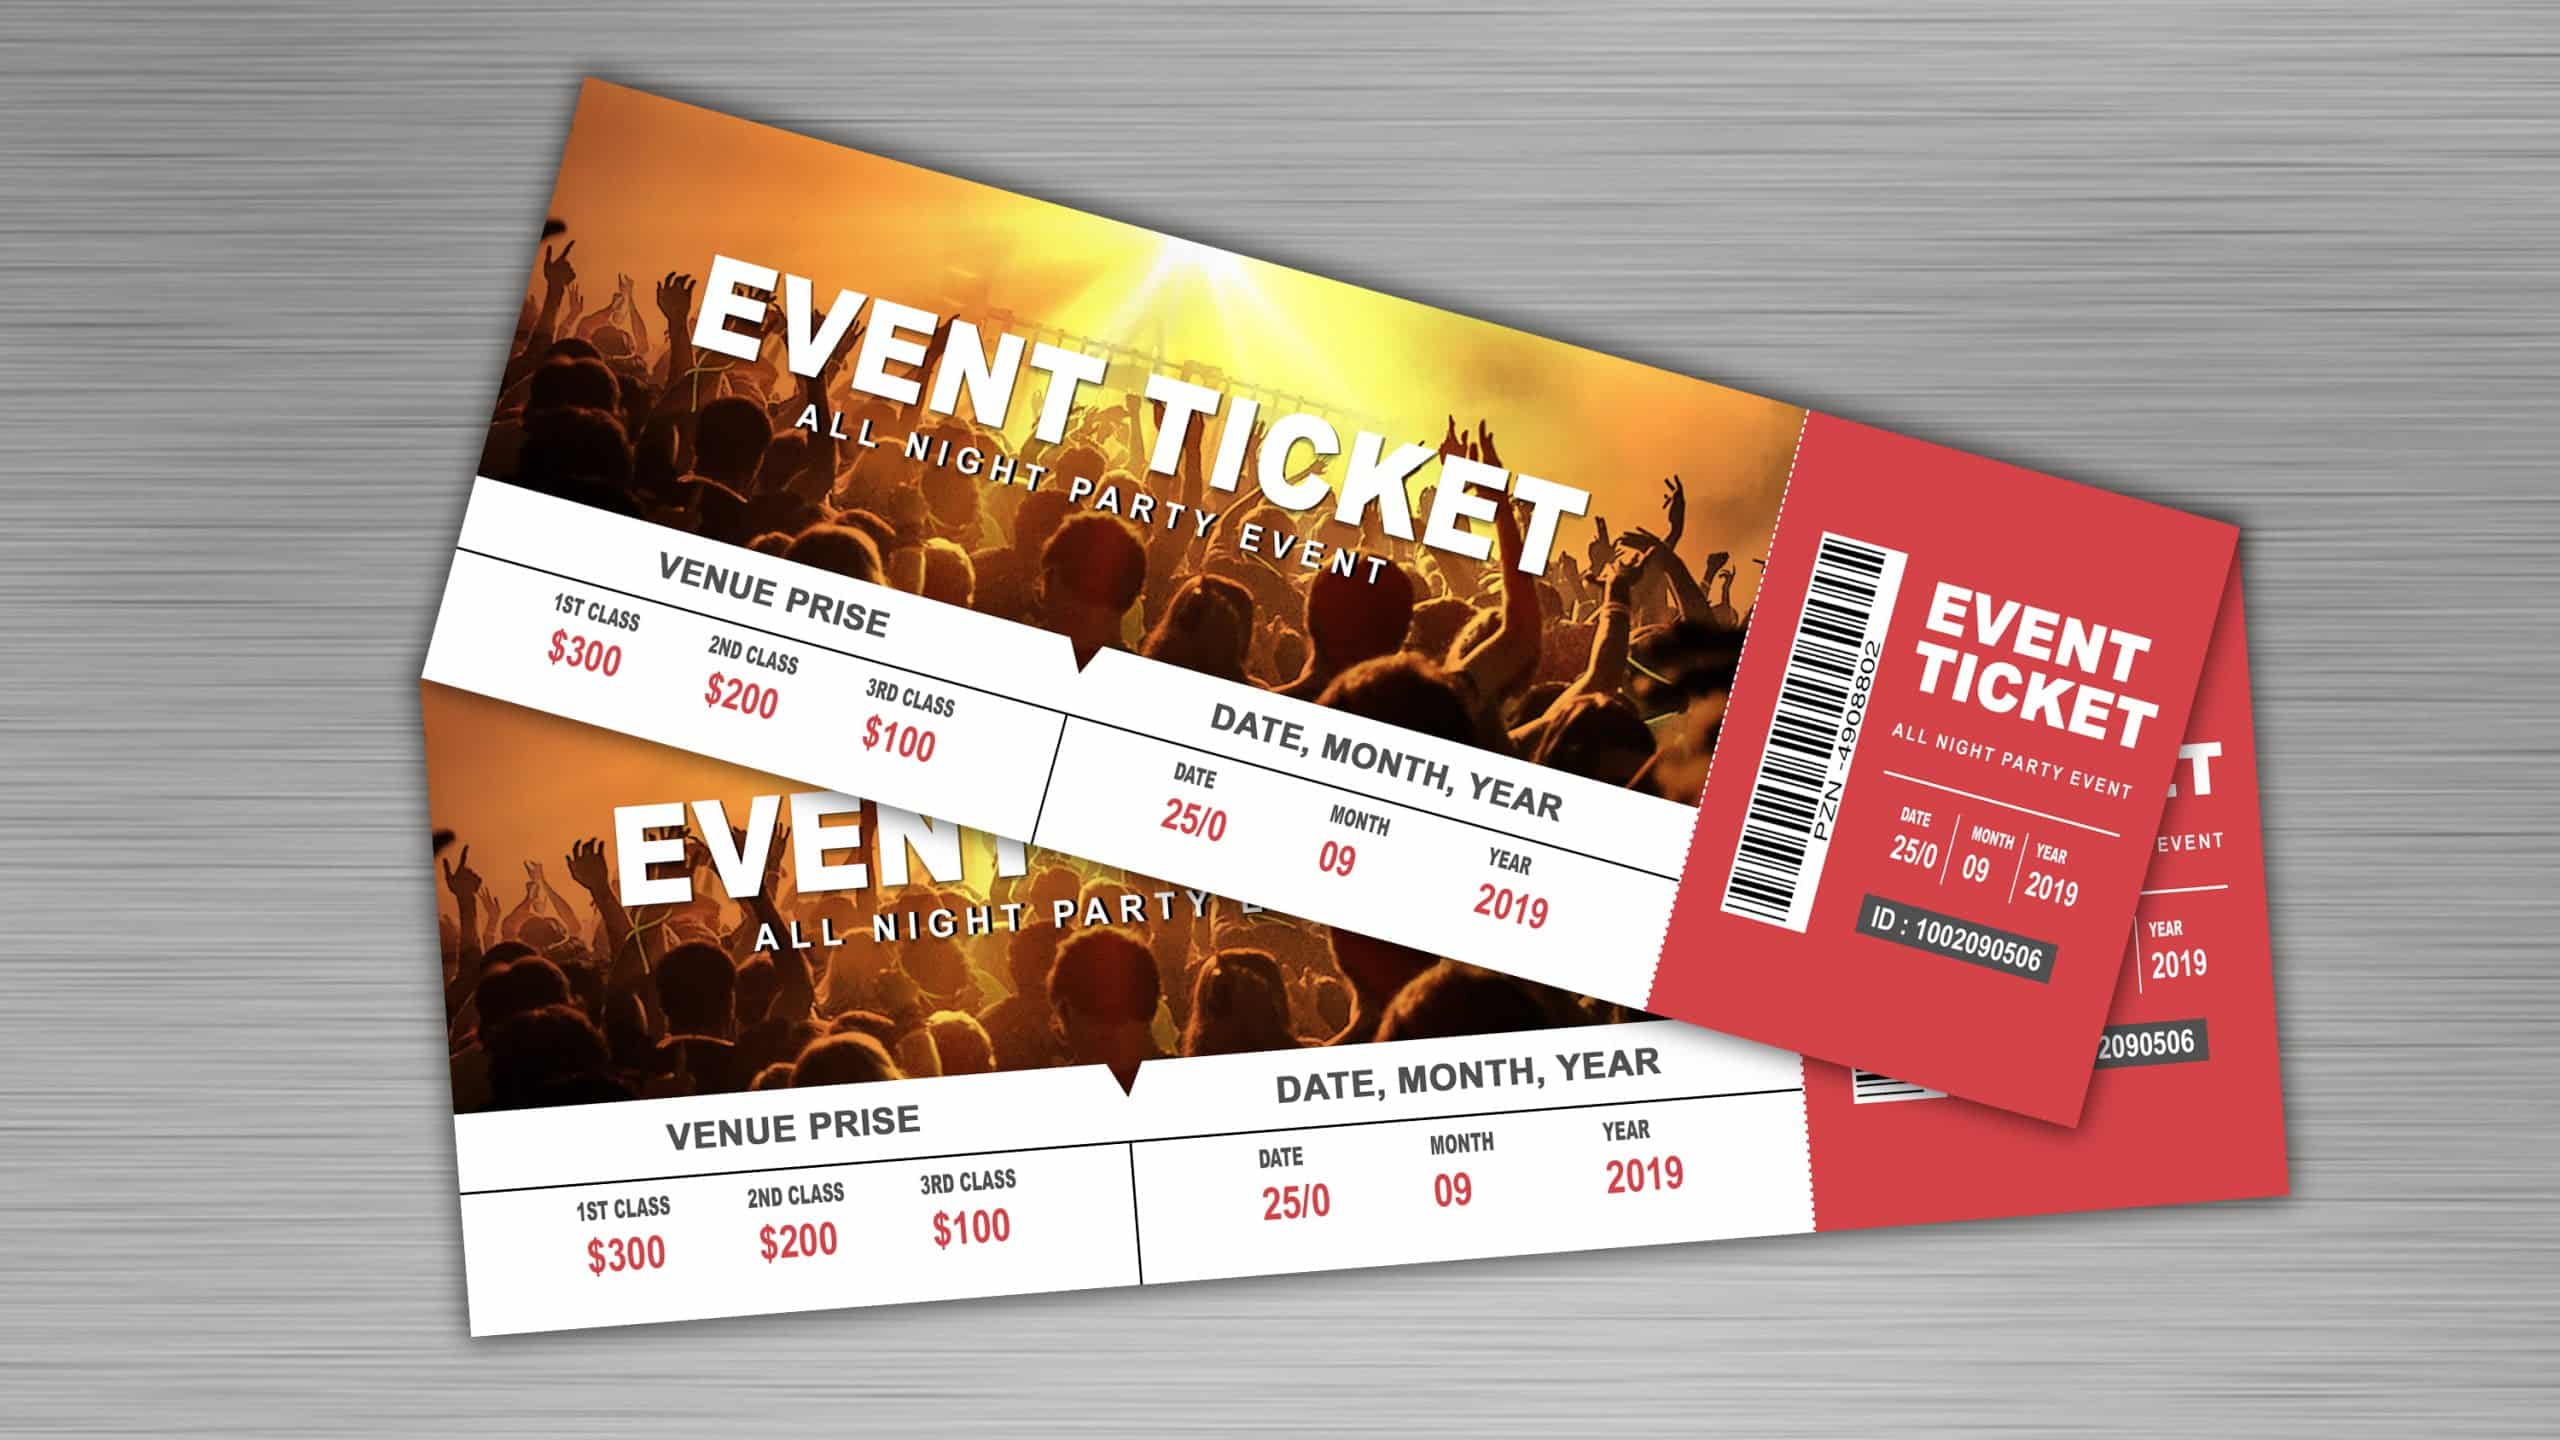 How to Set Up a Ticket Sales Website with WordPress?